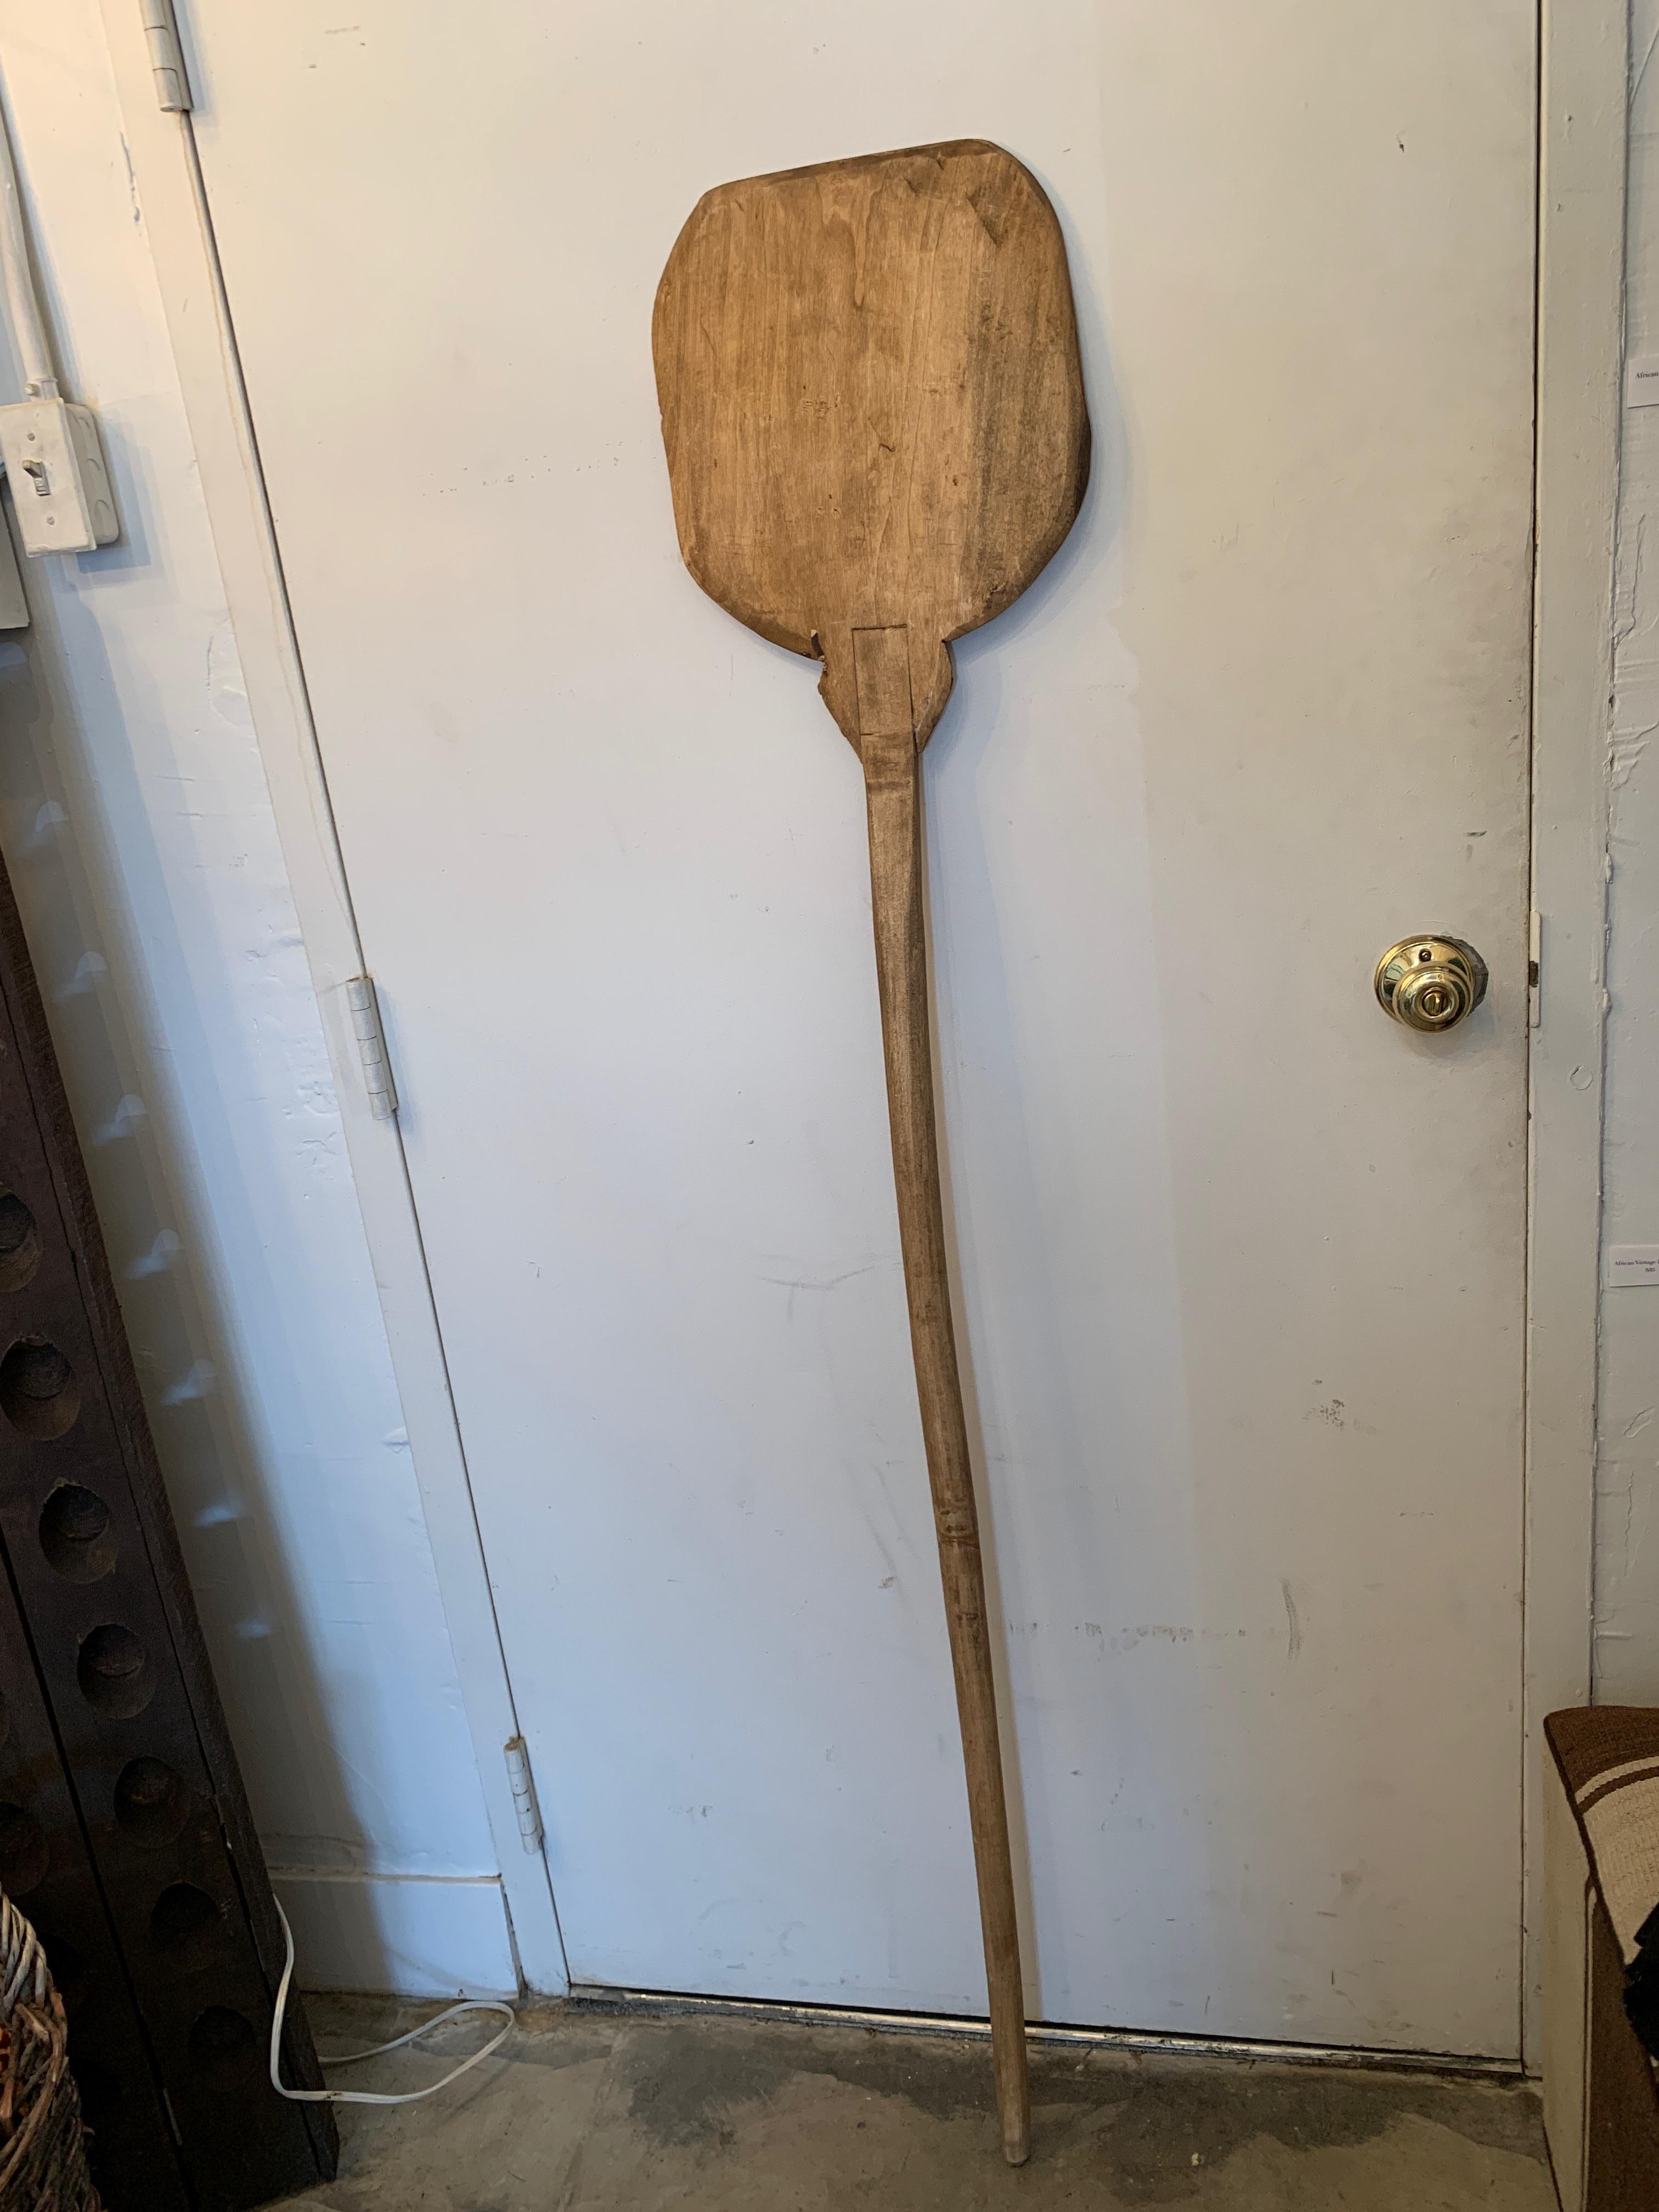 This vintage wooden baking paddle, originally from Europe, is perfect for putting homemade pizza or bread into a wood fired outdoor oven. Its rustic design connects you to a past of bread making, going back thousands of years. Also a wonderful